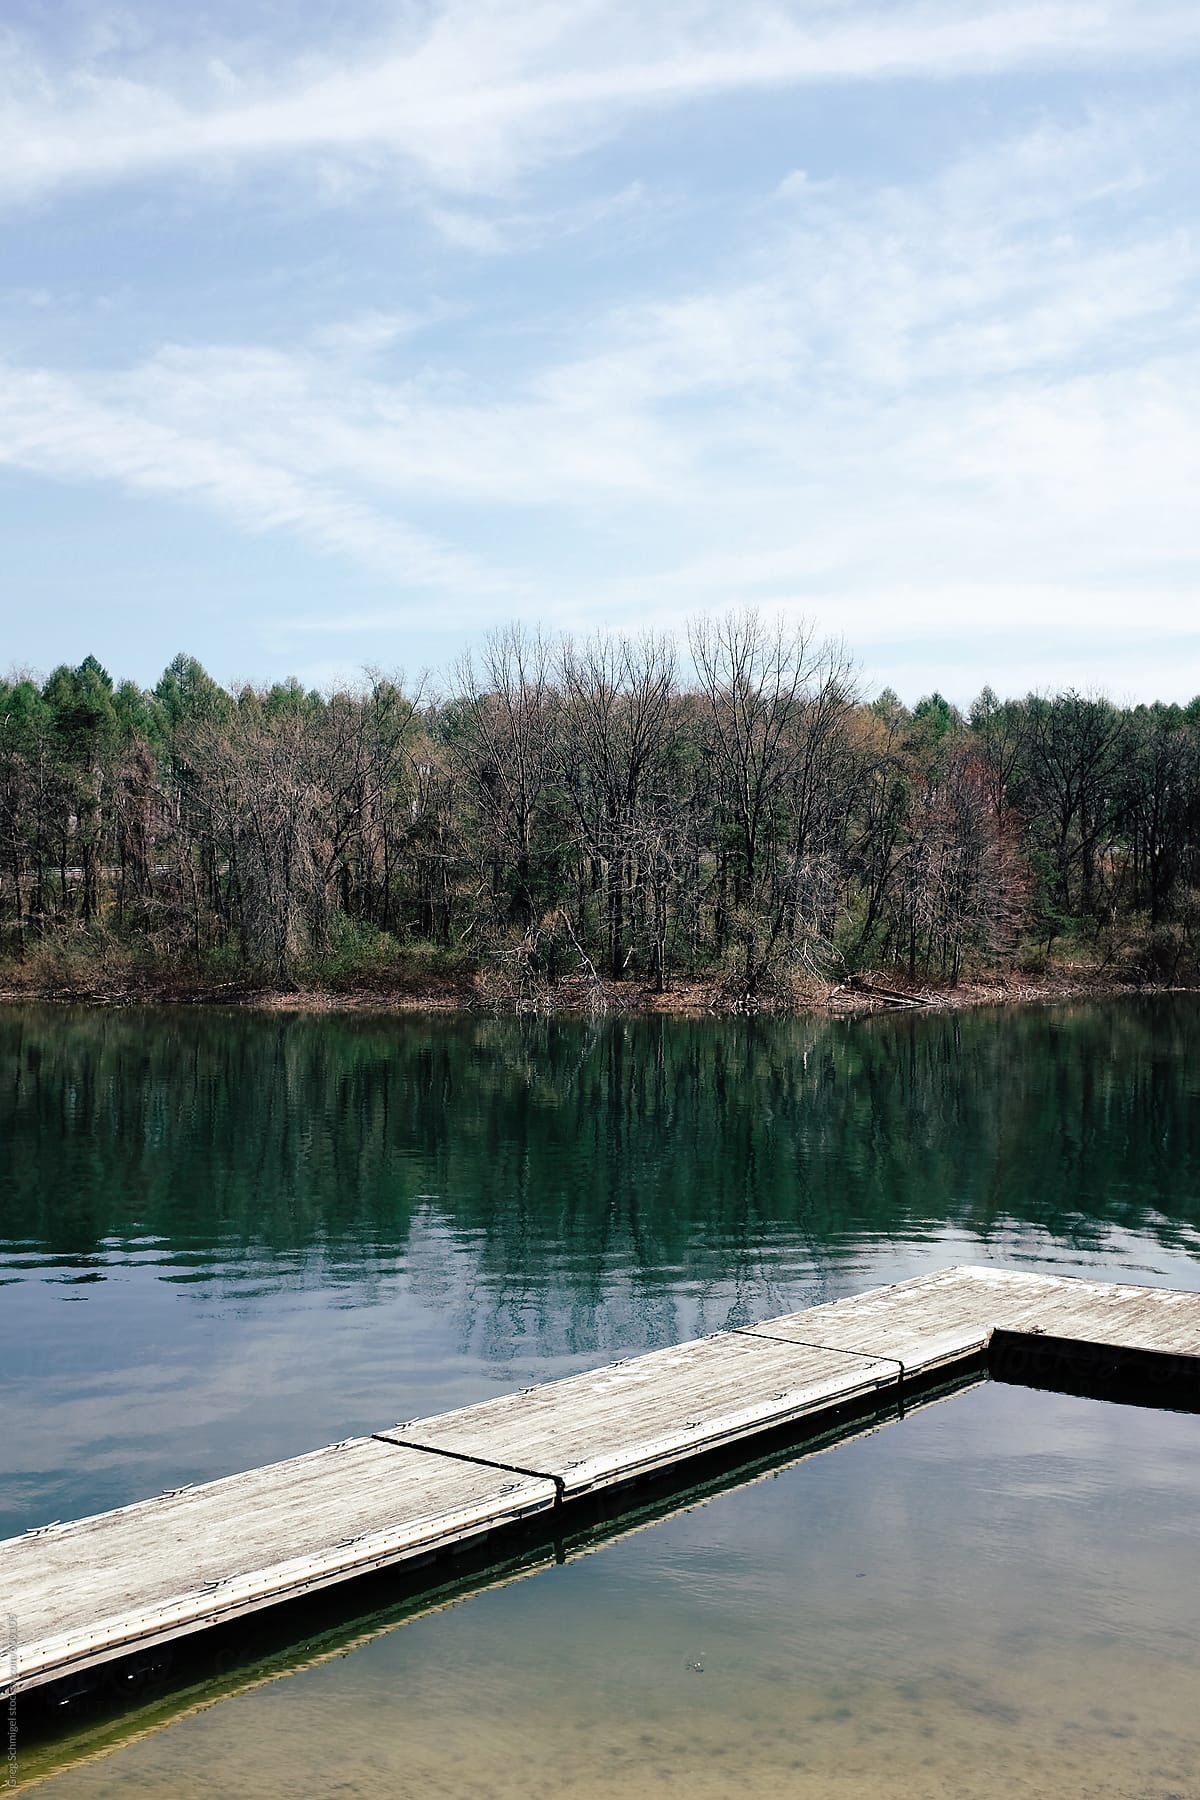 Landscape view of a floating dock in a clear lake with trees and mountains in the background